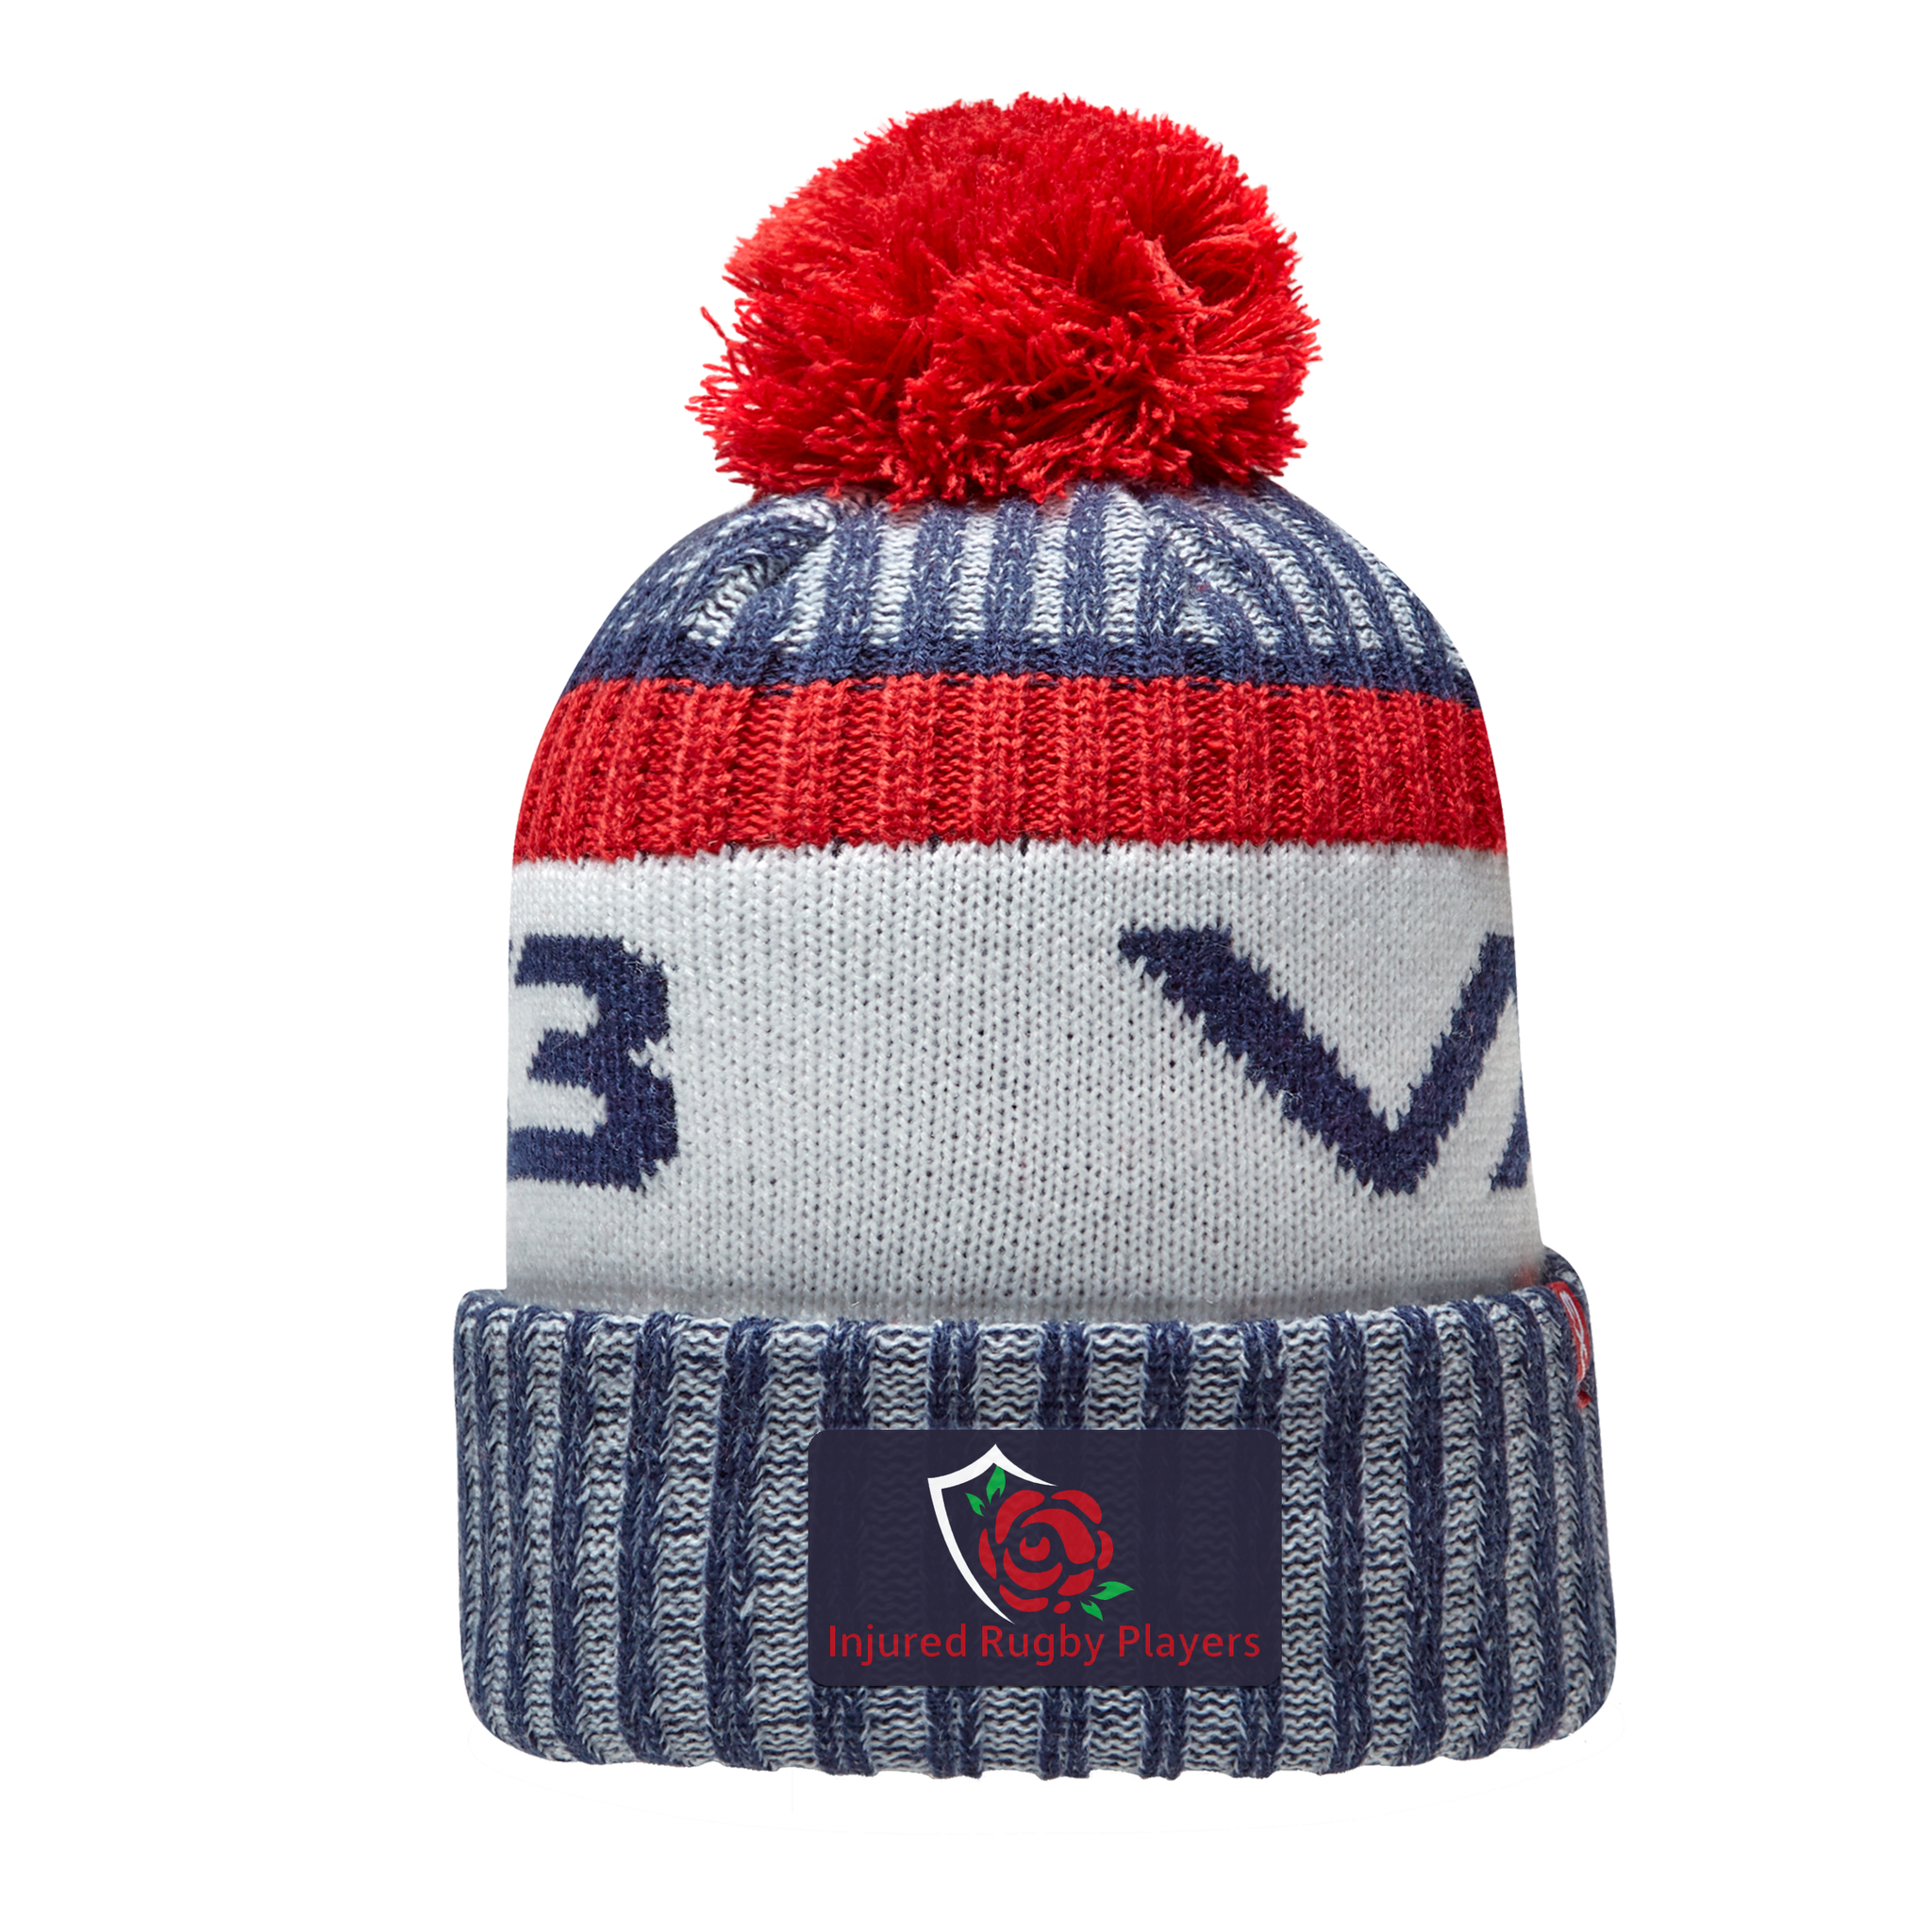 Injured Rugby Players Marl Bobble Hat